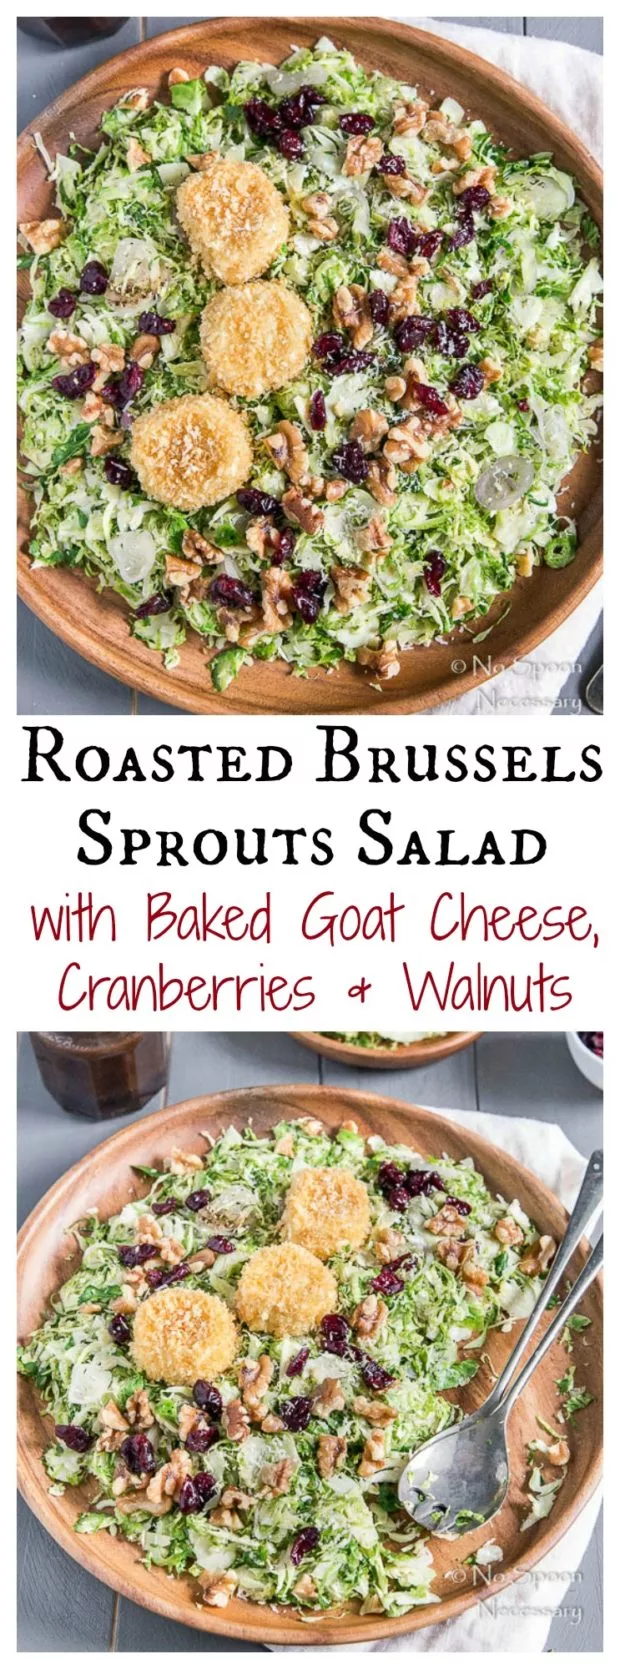 Roasted Brussels Sprouts Salad with Goat Cheese, Cranberries & Walnuts1